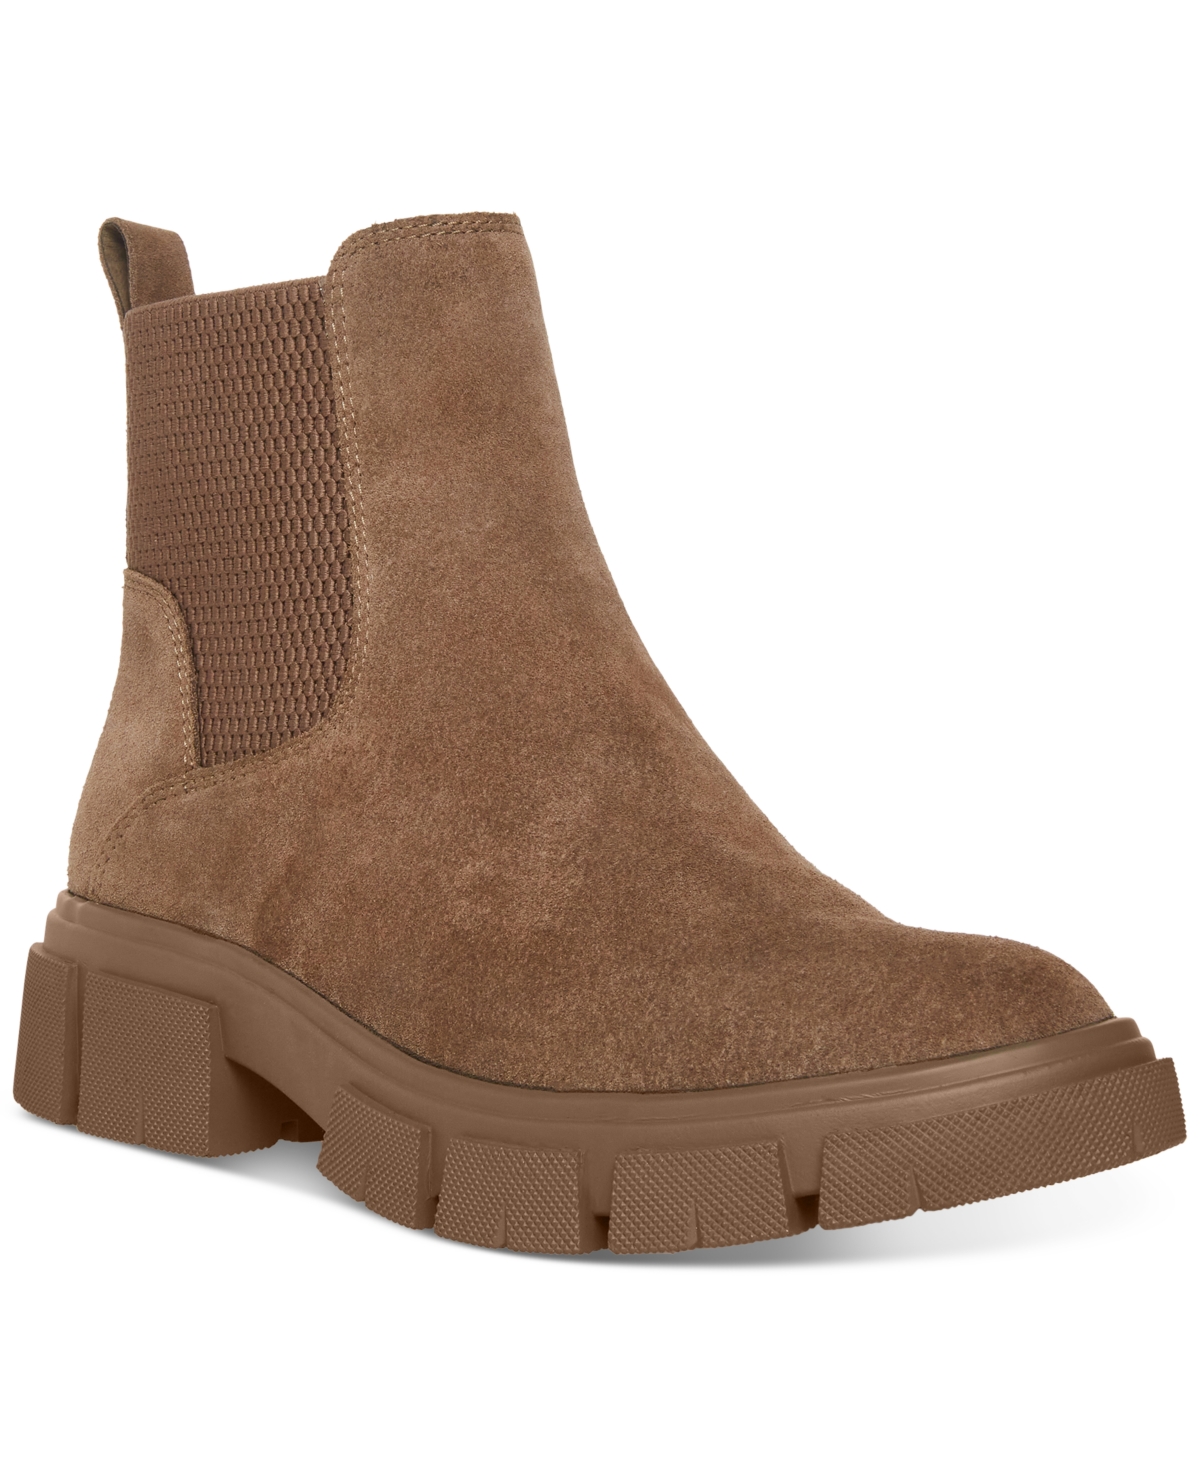 Aqua College Women's Priya Chelsea Boots, Created For Macy's Women's Shoes In Dark Taupe